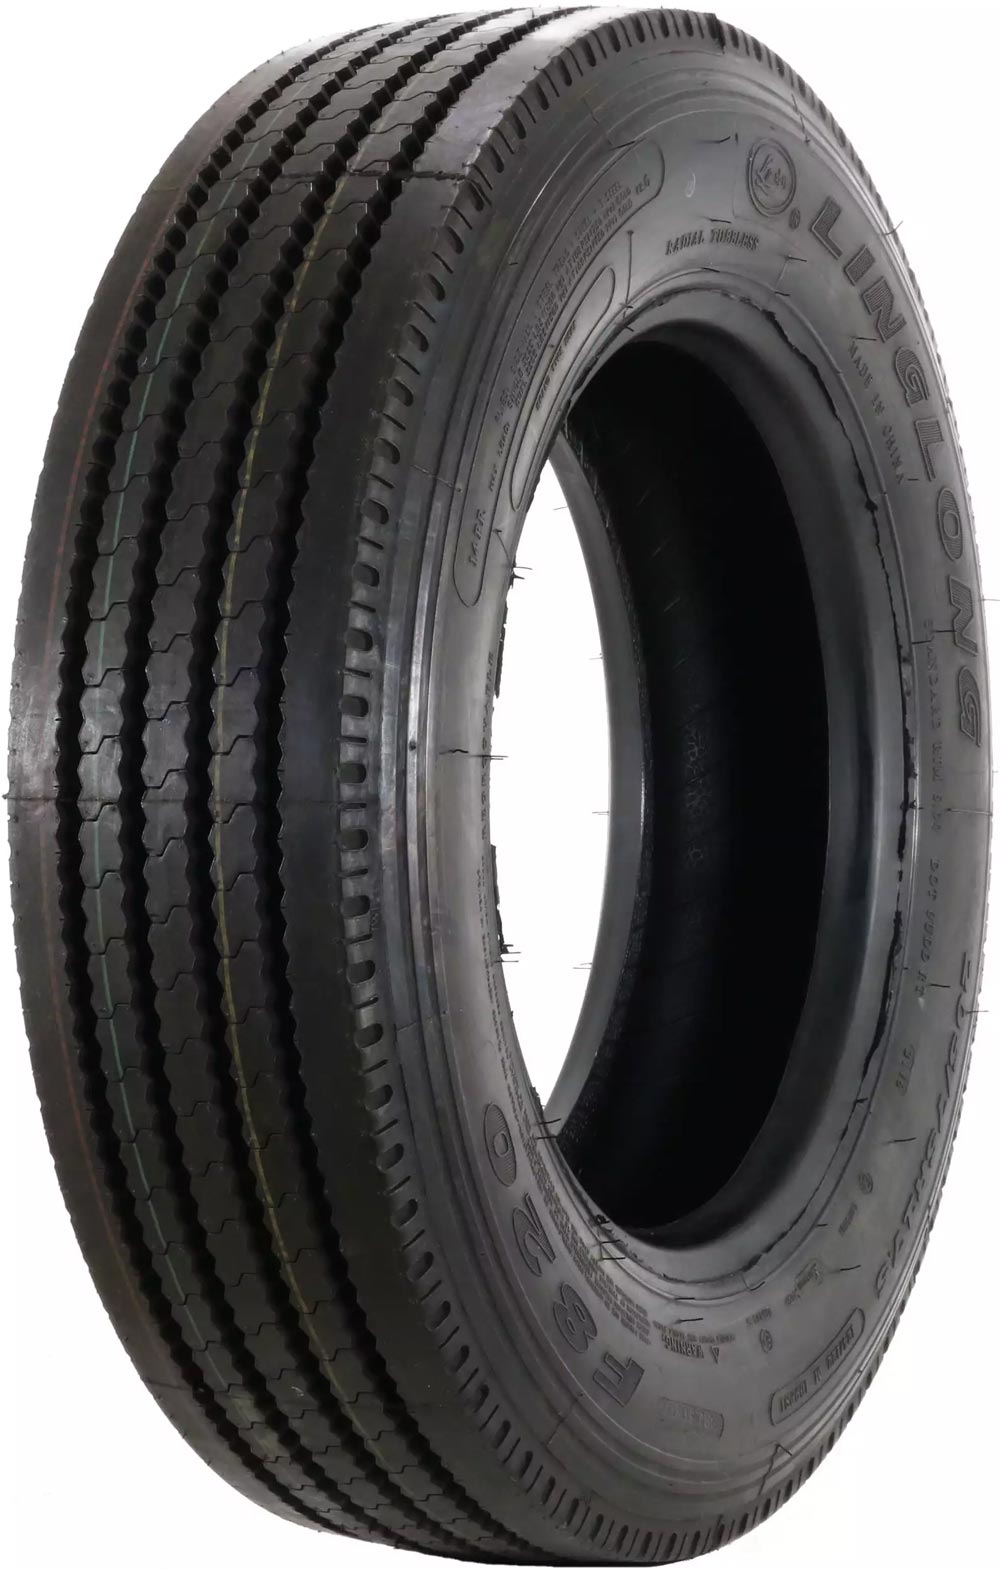 product_type-heavy_tires LINGLONG F820 16PR 265/70 R19.5 140M